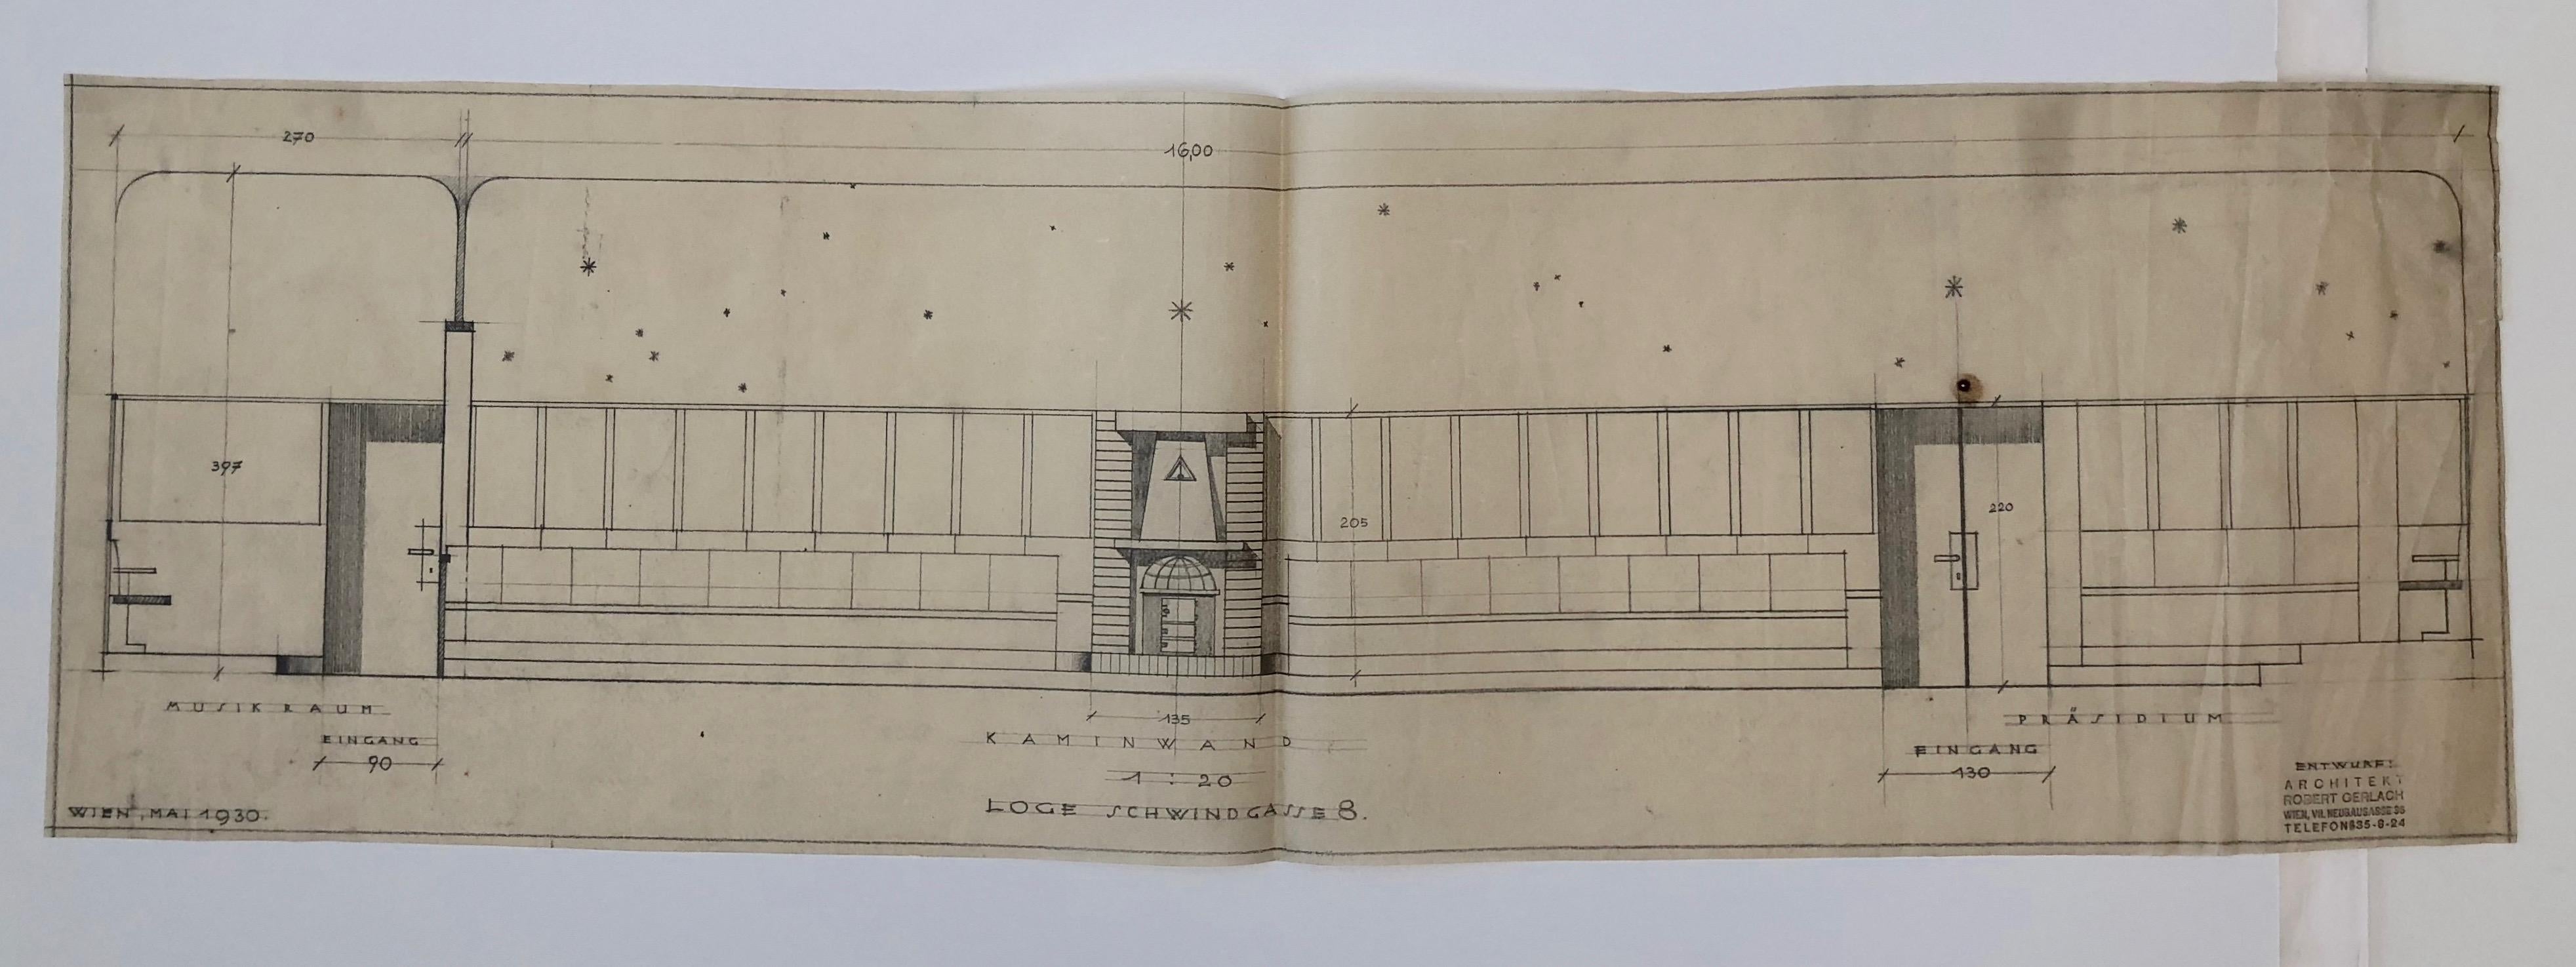 Set of Working Drawings, 1930, for a Free Masons Lodge, Schwind Gasse, Vienna For Sale 7